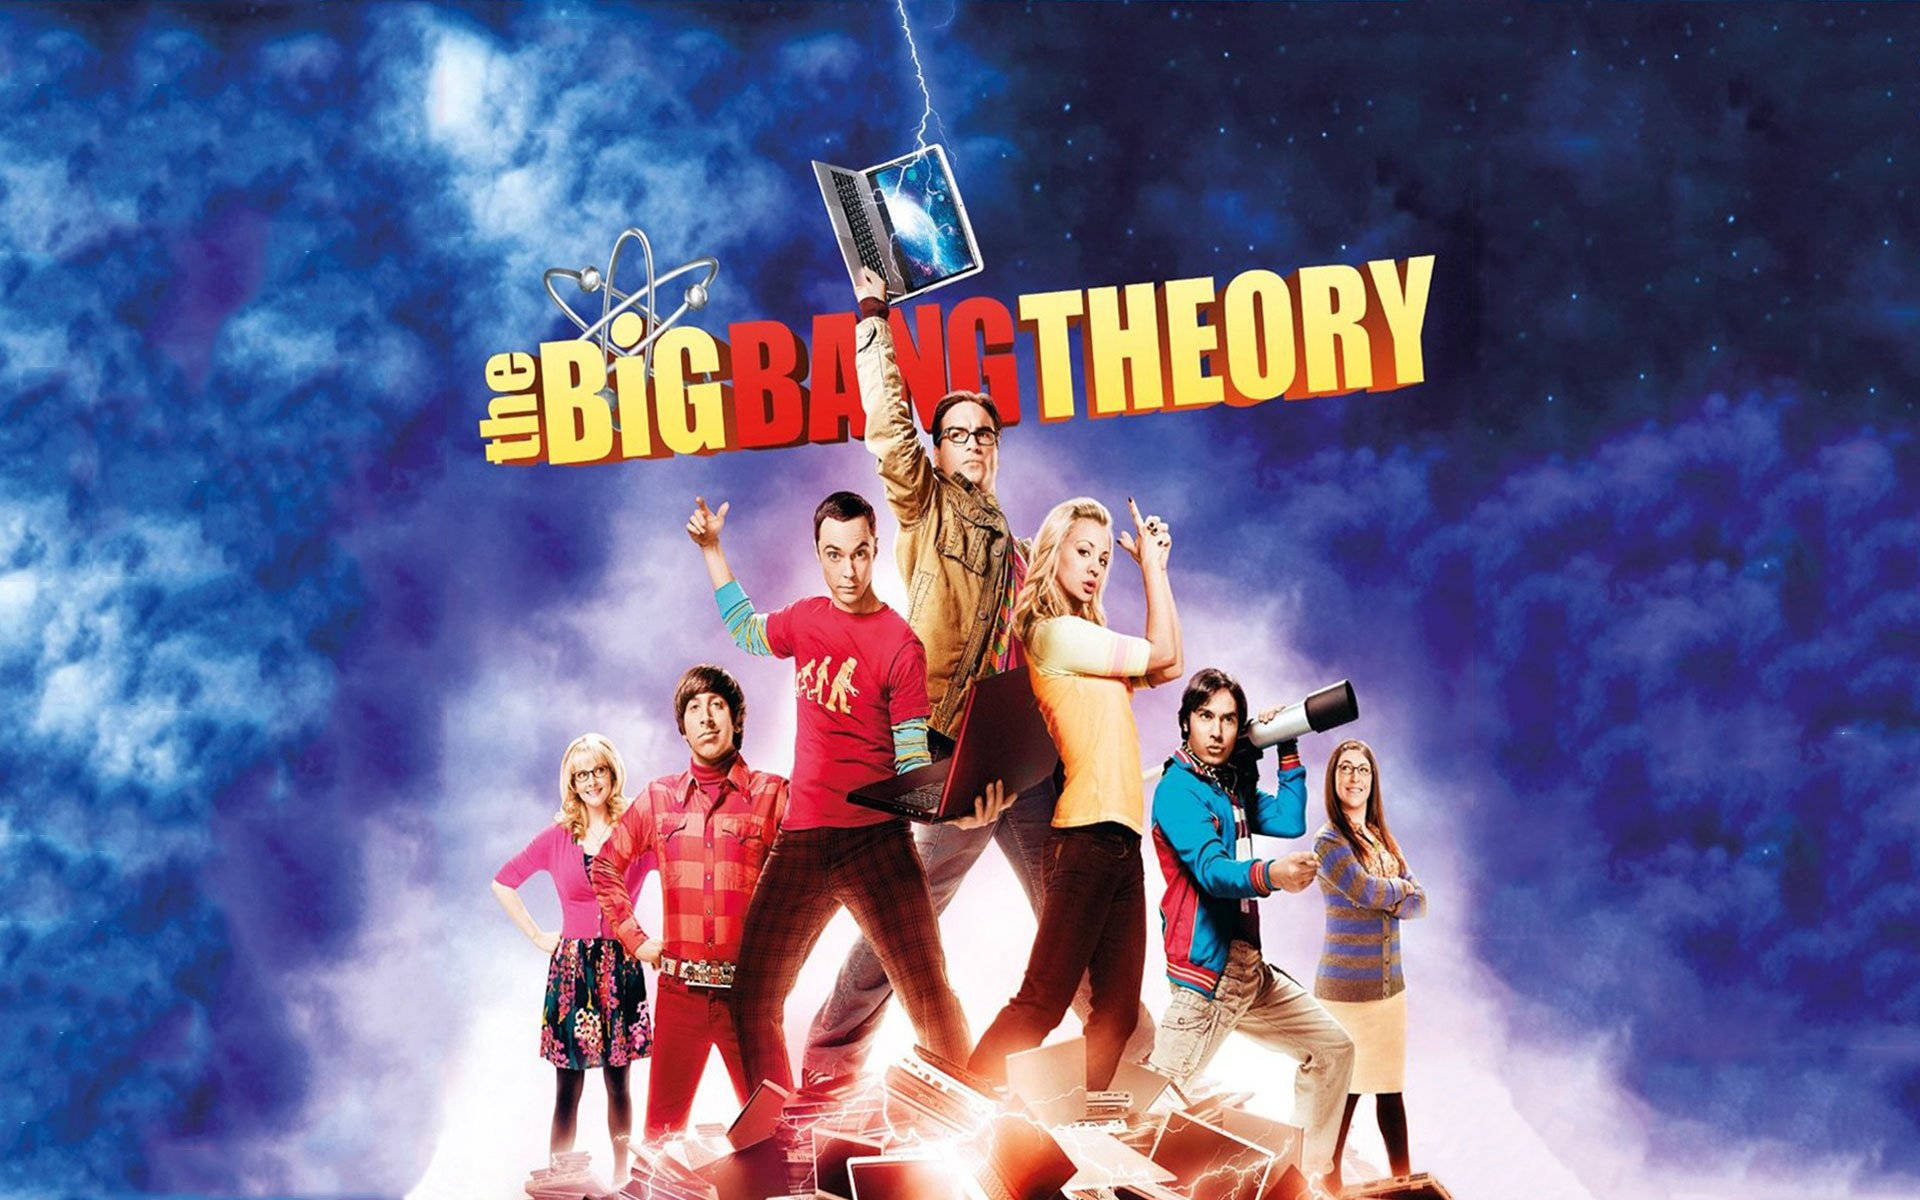 The Big Bang Theory Show Poster Background